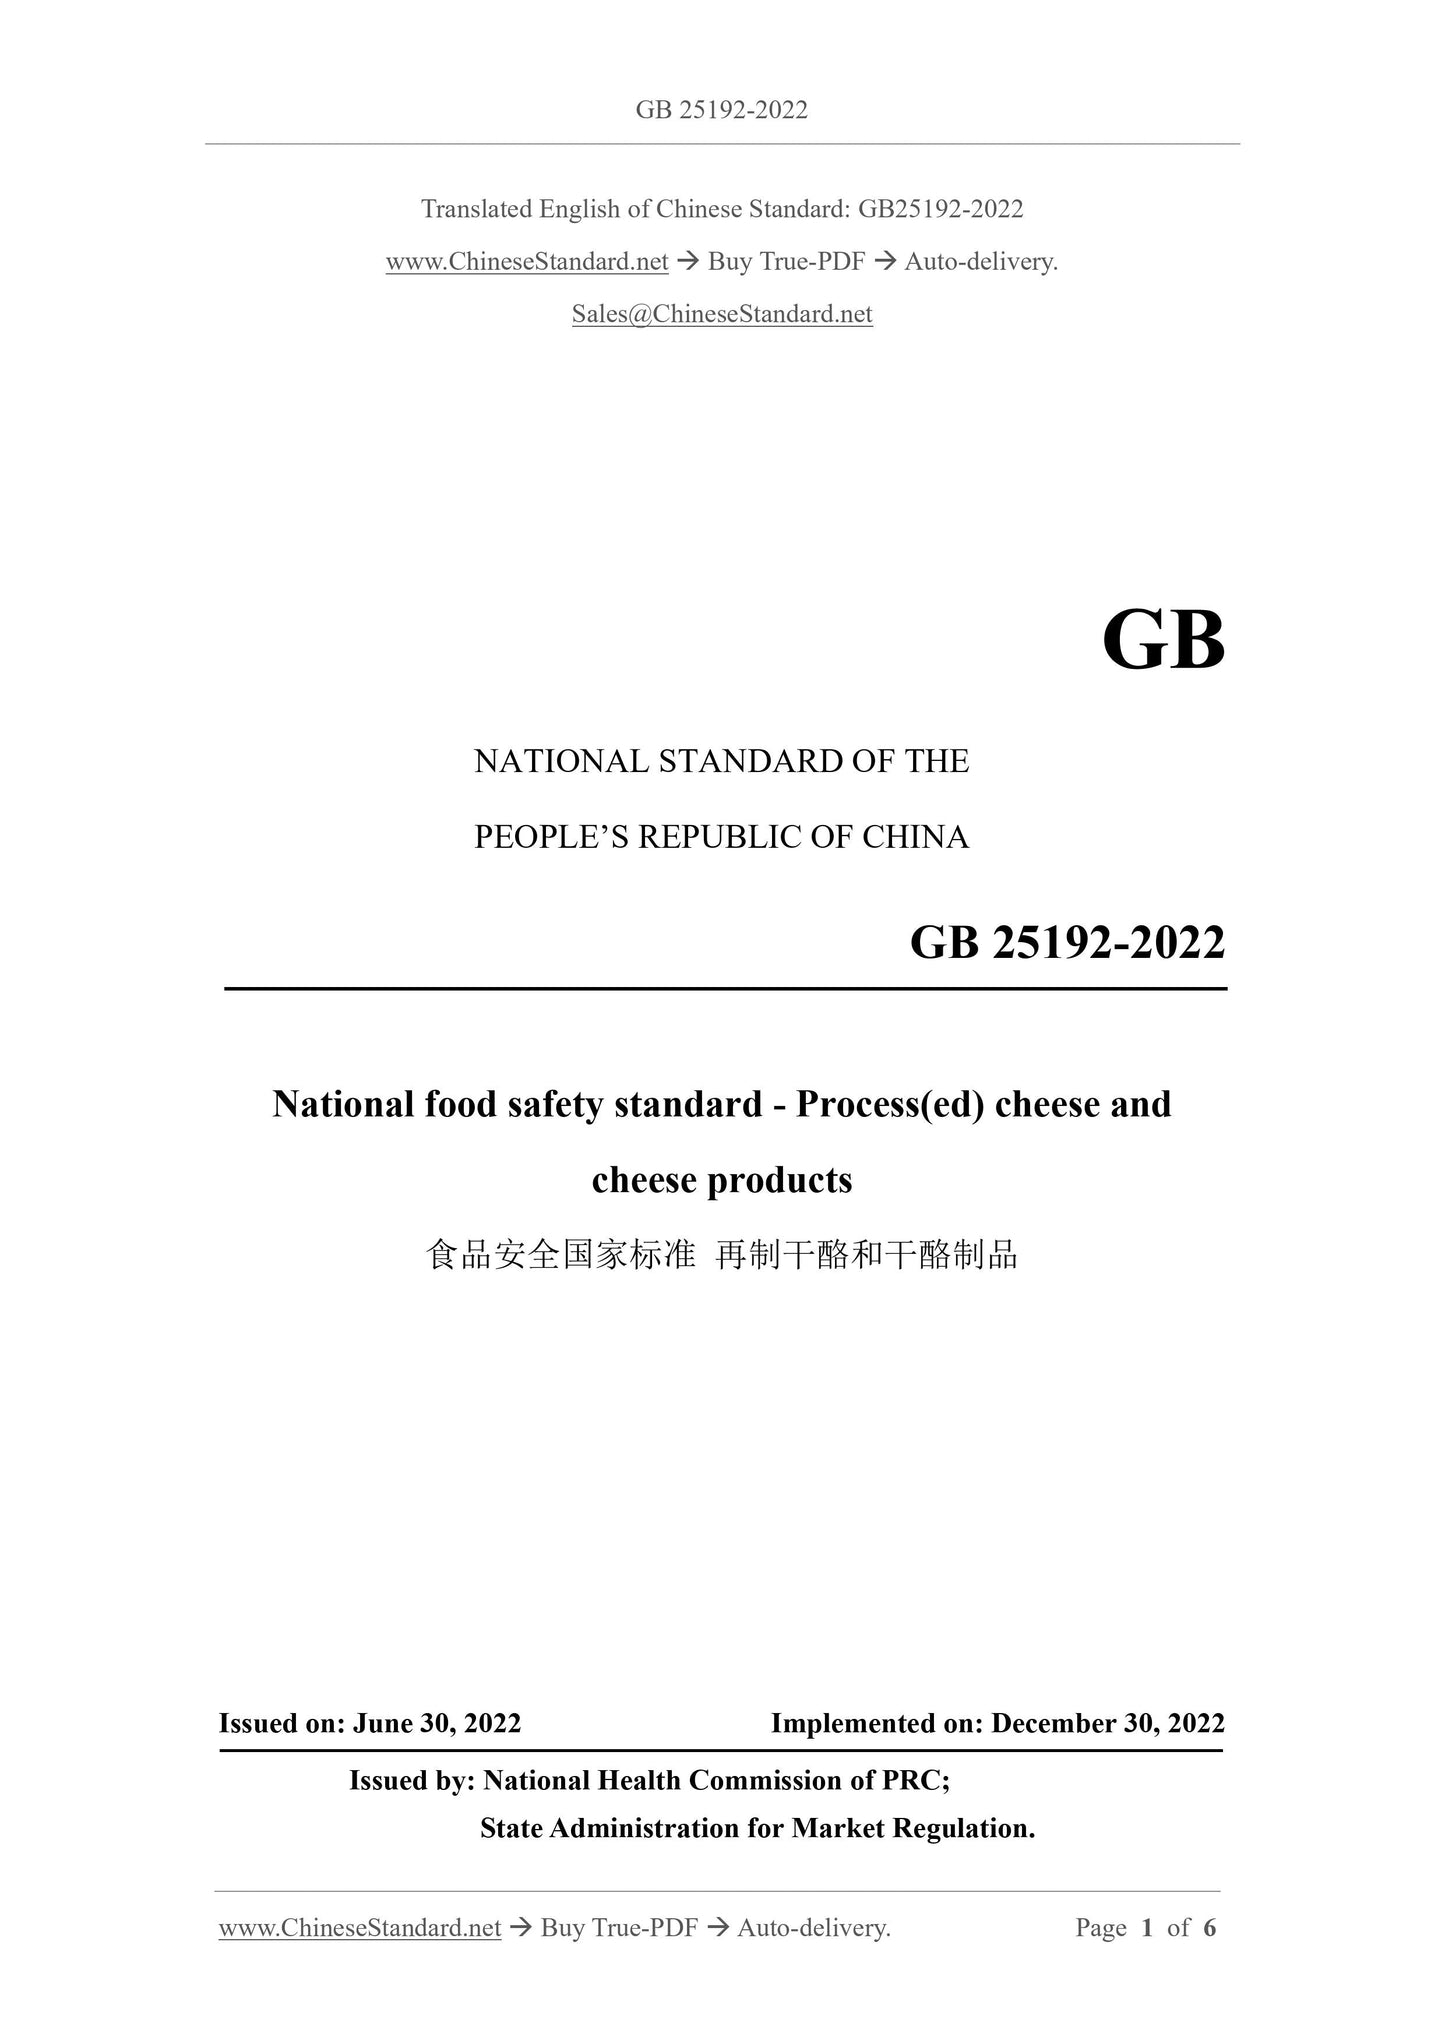 GB 25192-2022 Page 1